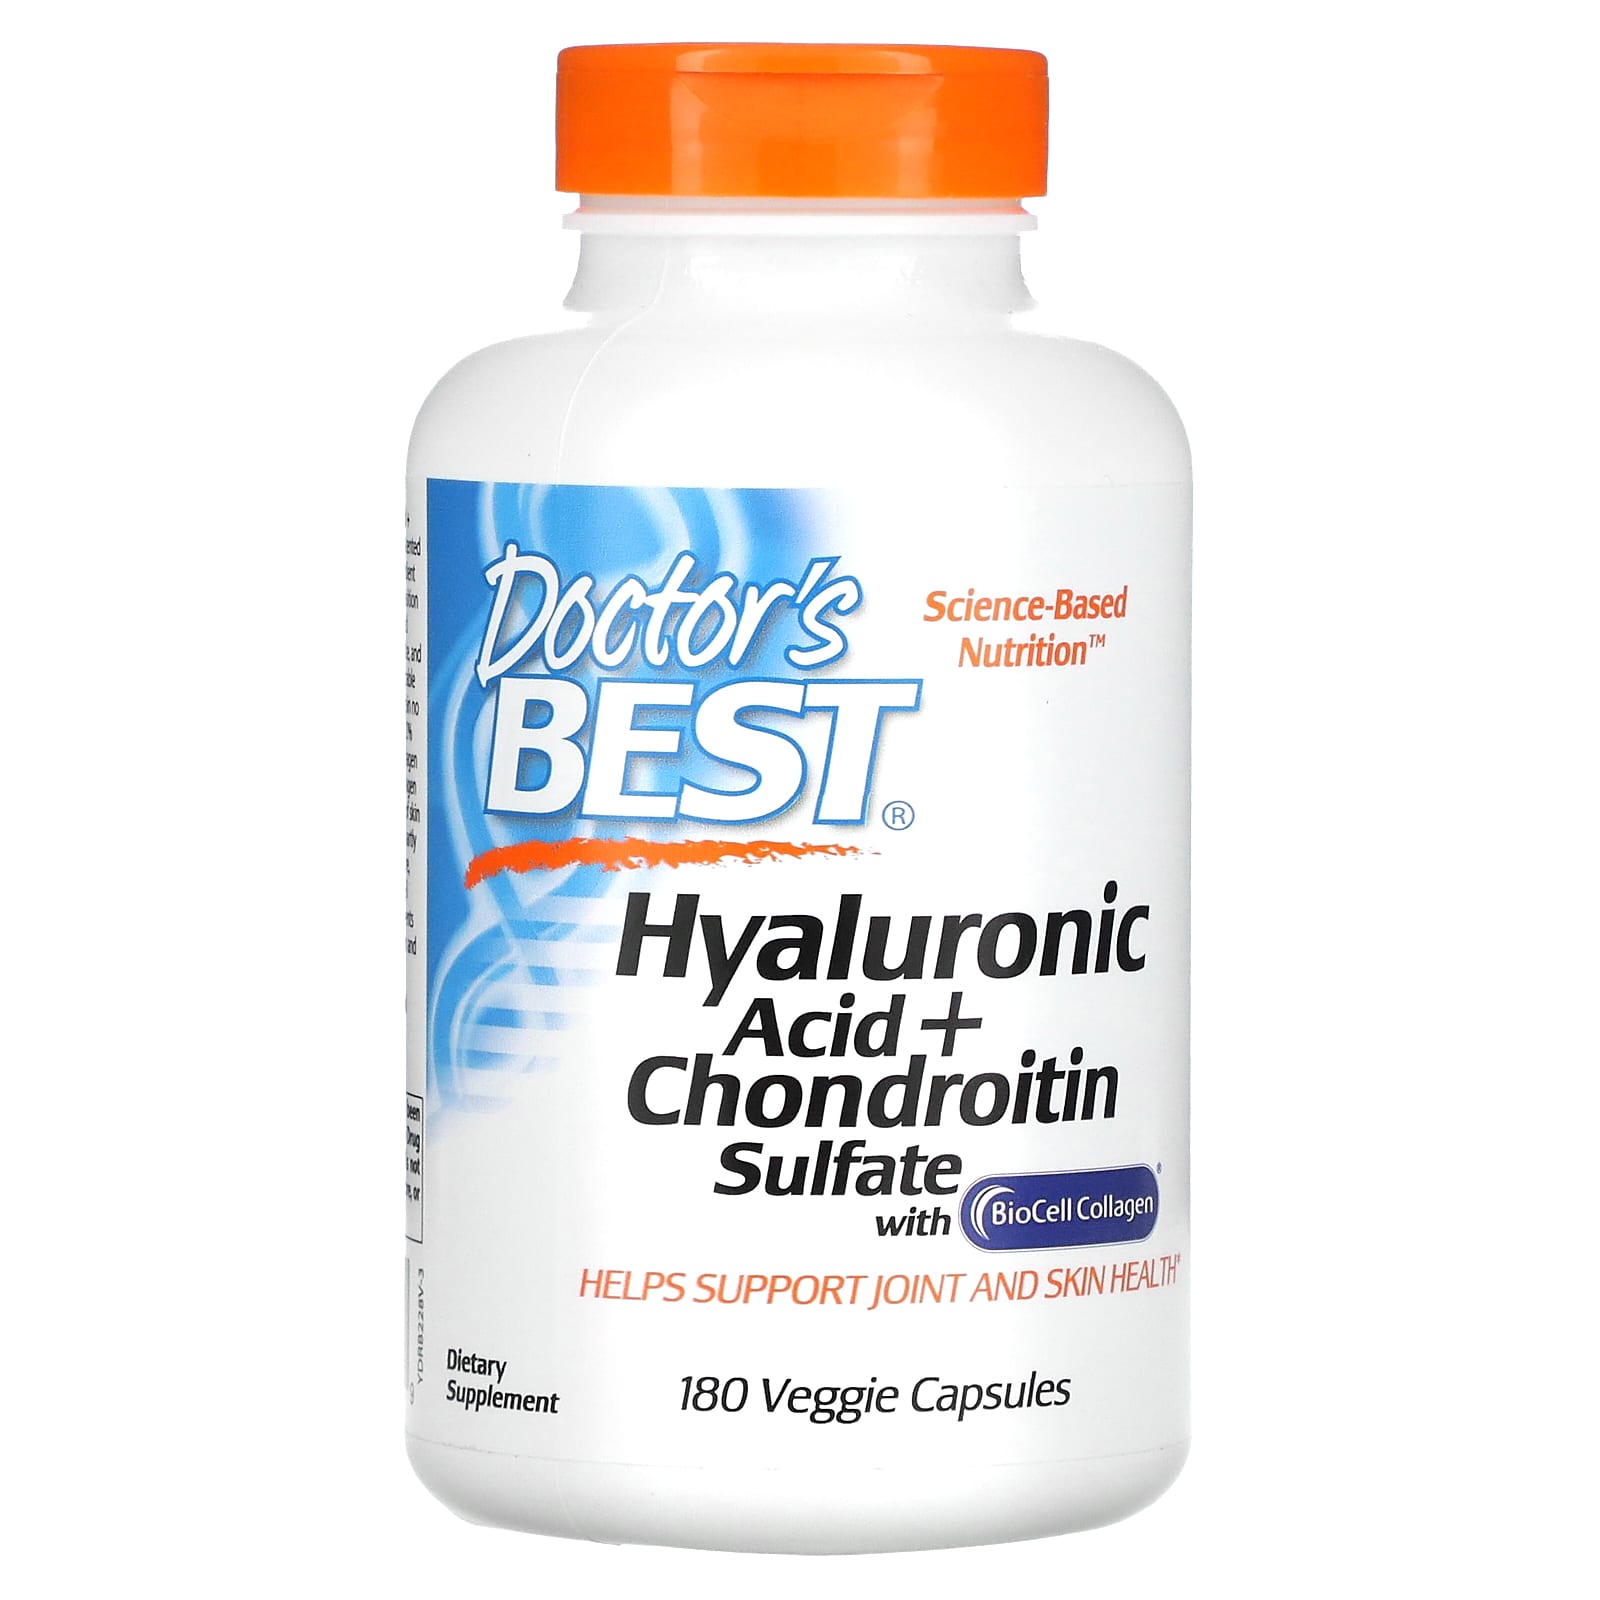 Doctor's Best-Hyaluronic Acid + Chondroitin Sulfate with BioCell Collagen-180 Veggie Capsules